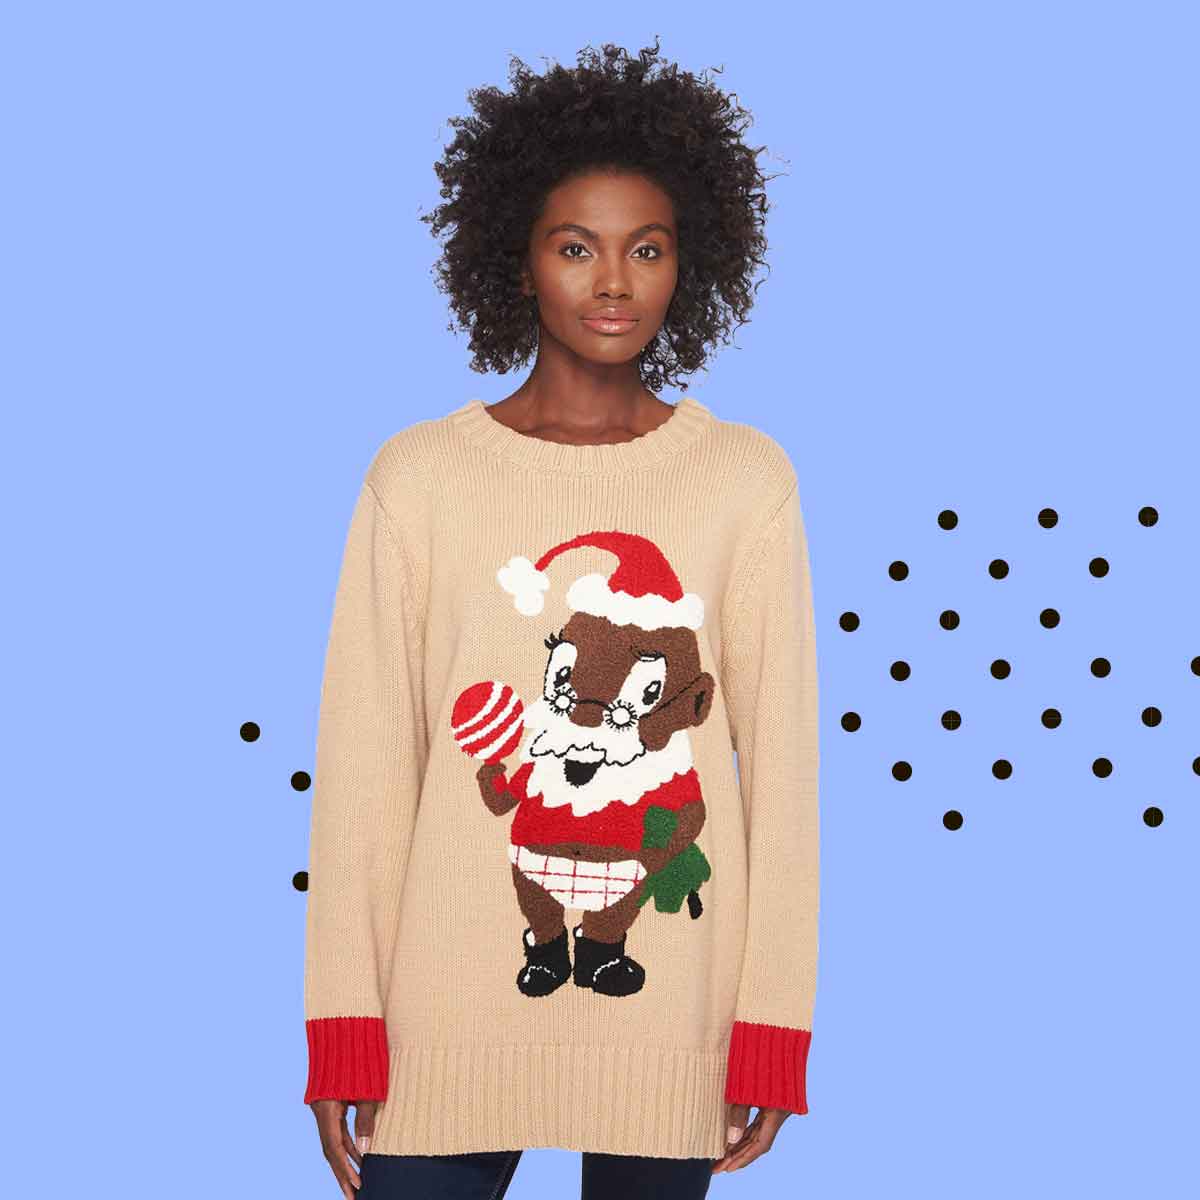 Guys, Whoopi Goldberg Makes the Best Christmas Sweaters, Seriously
